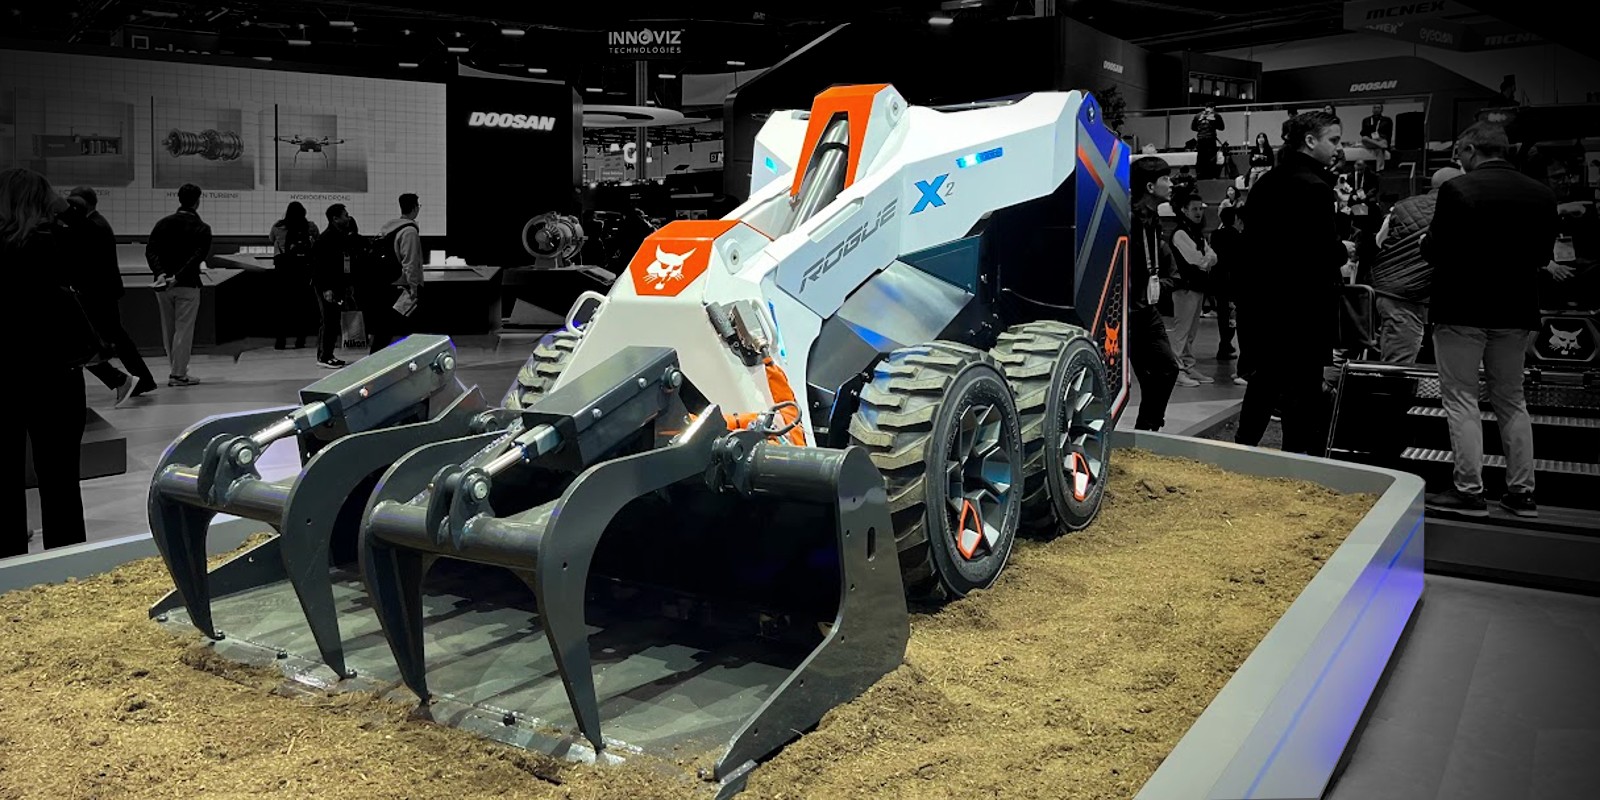 Bobcat imbeds augmented reality into skid steer windshield